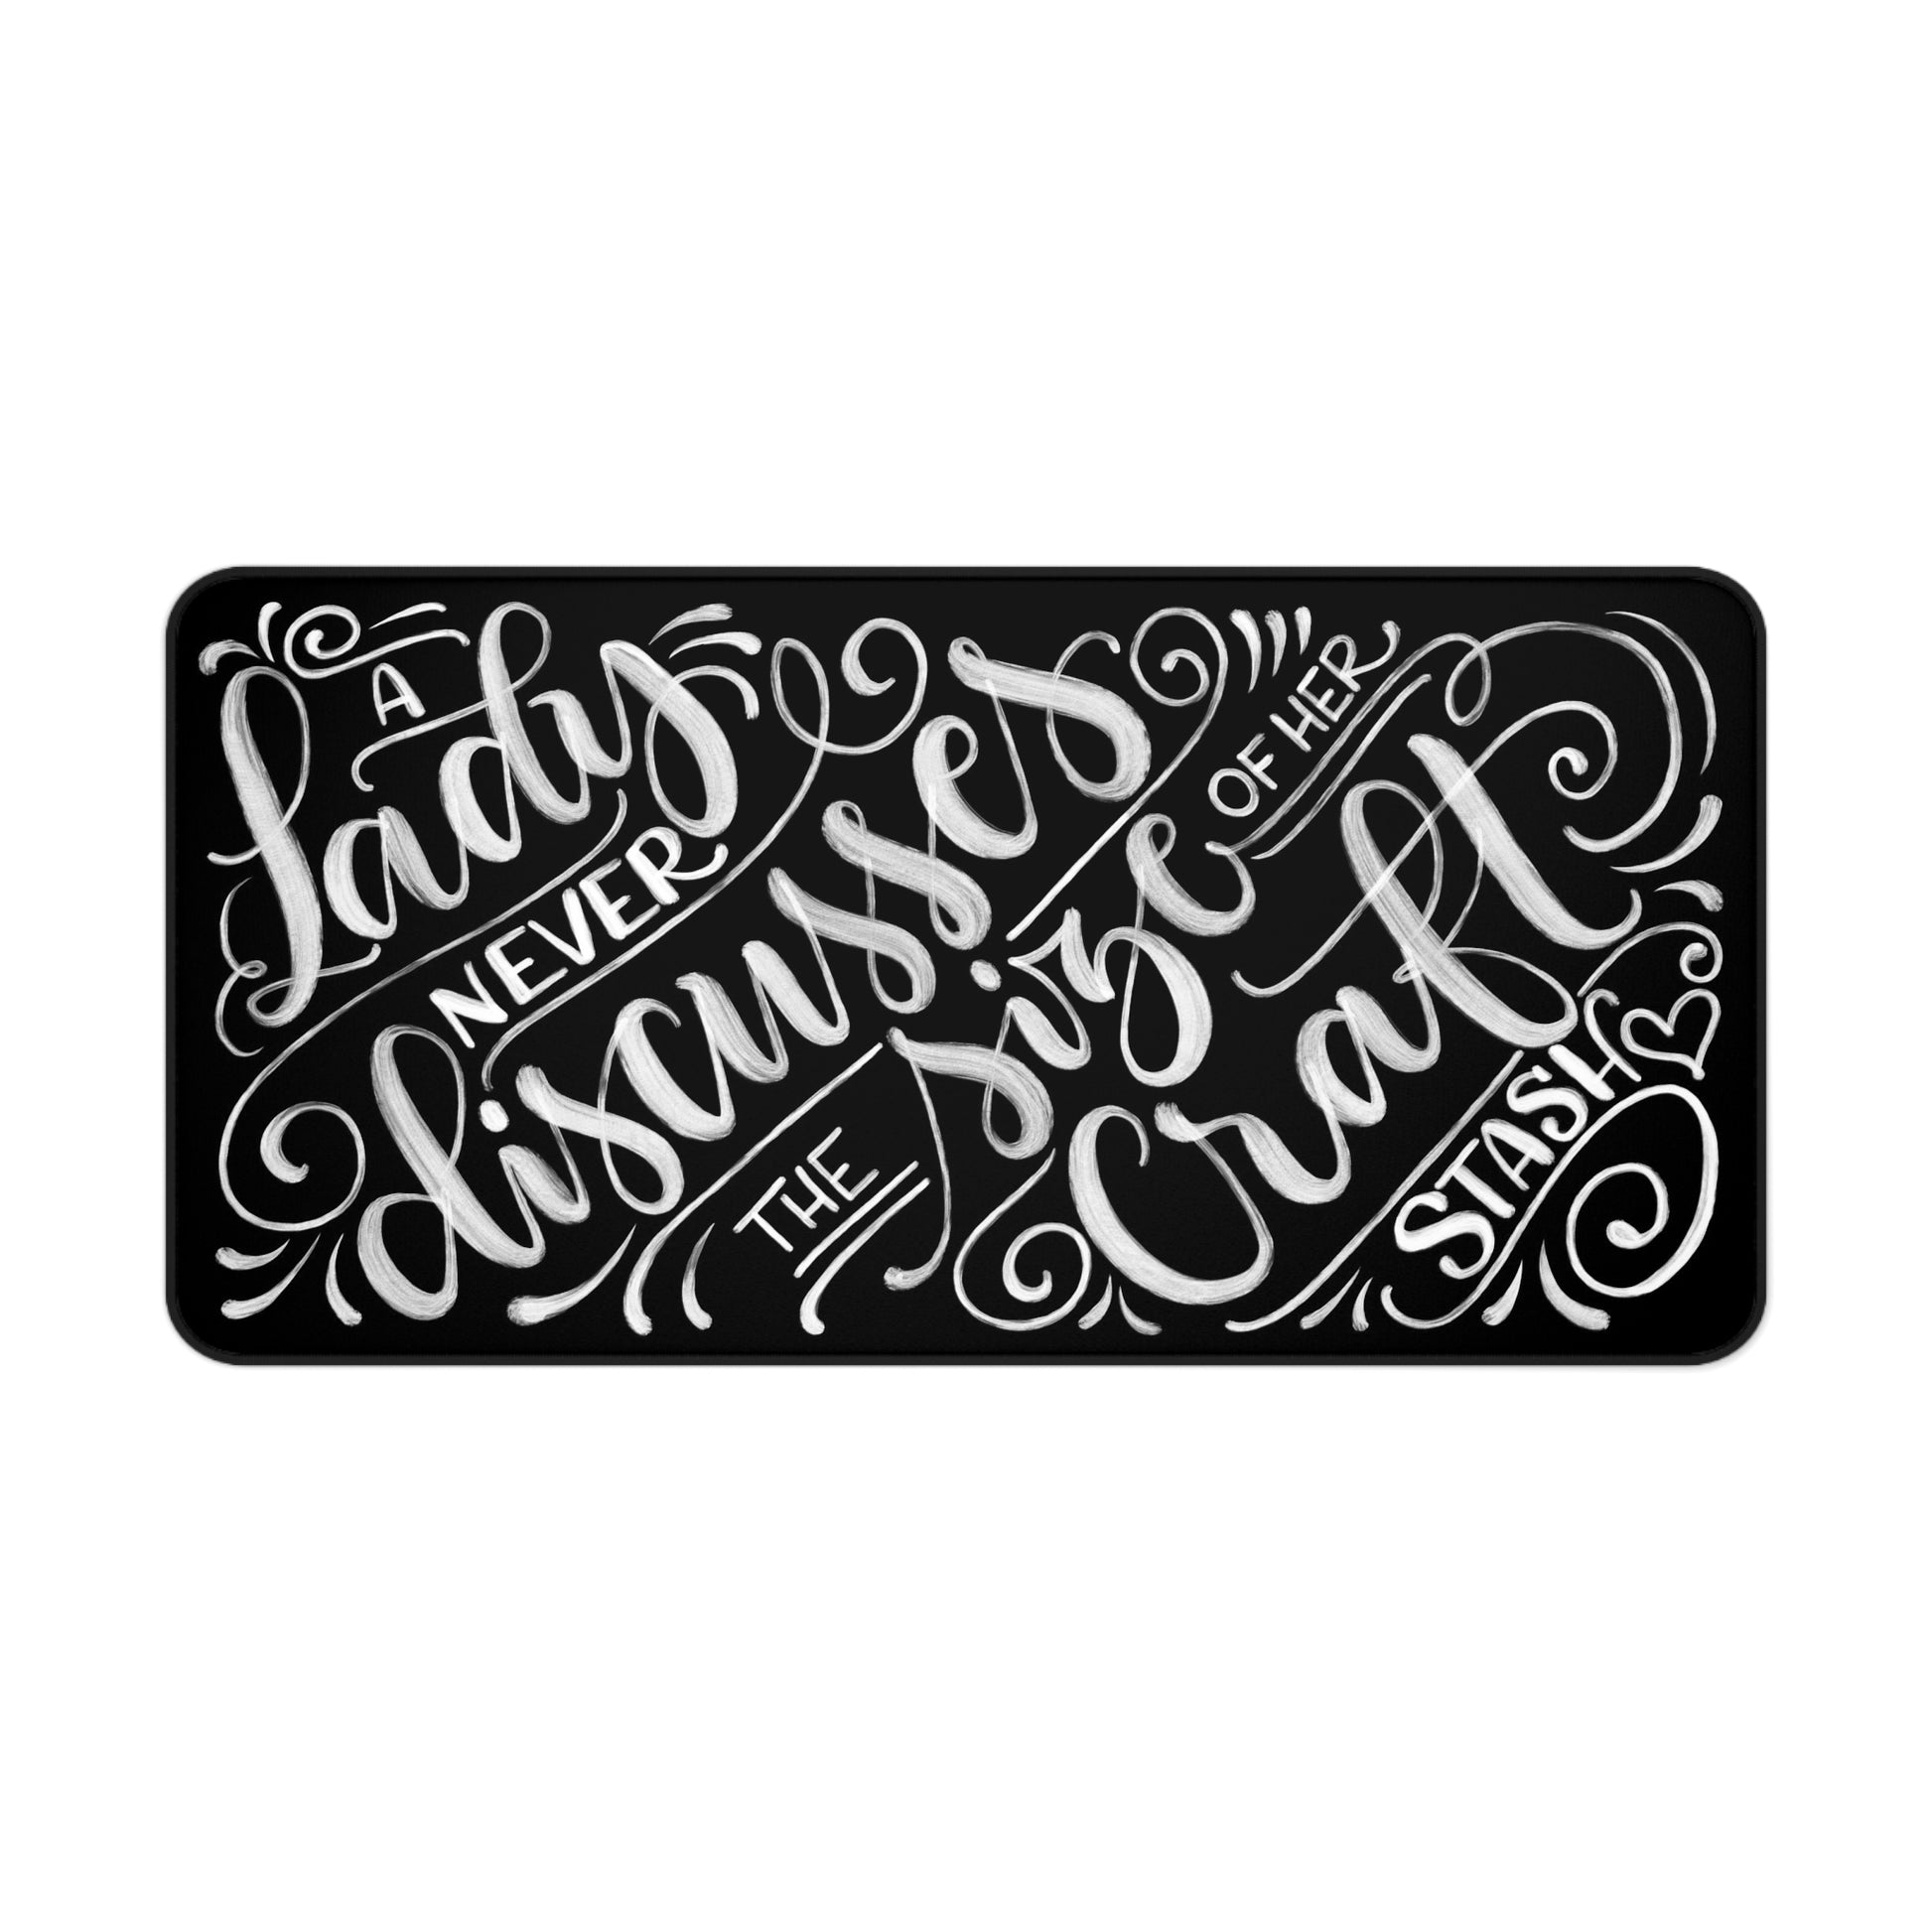 A Lady never discusses the size of her craft stash - Desk Mat - howjoyfulshop